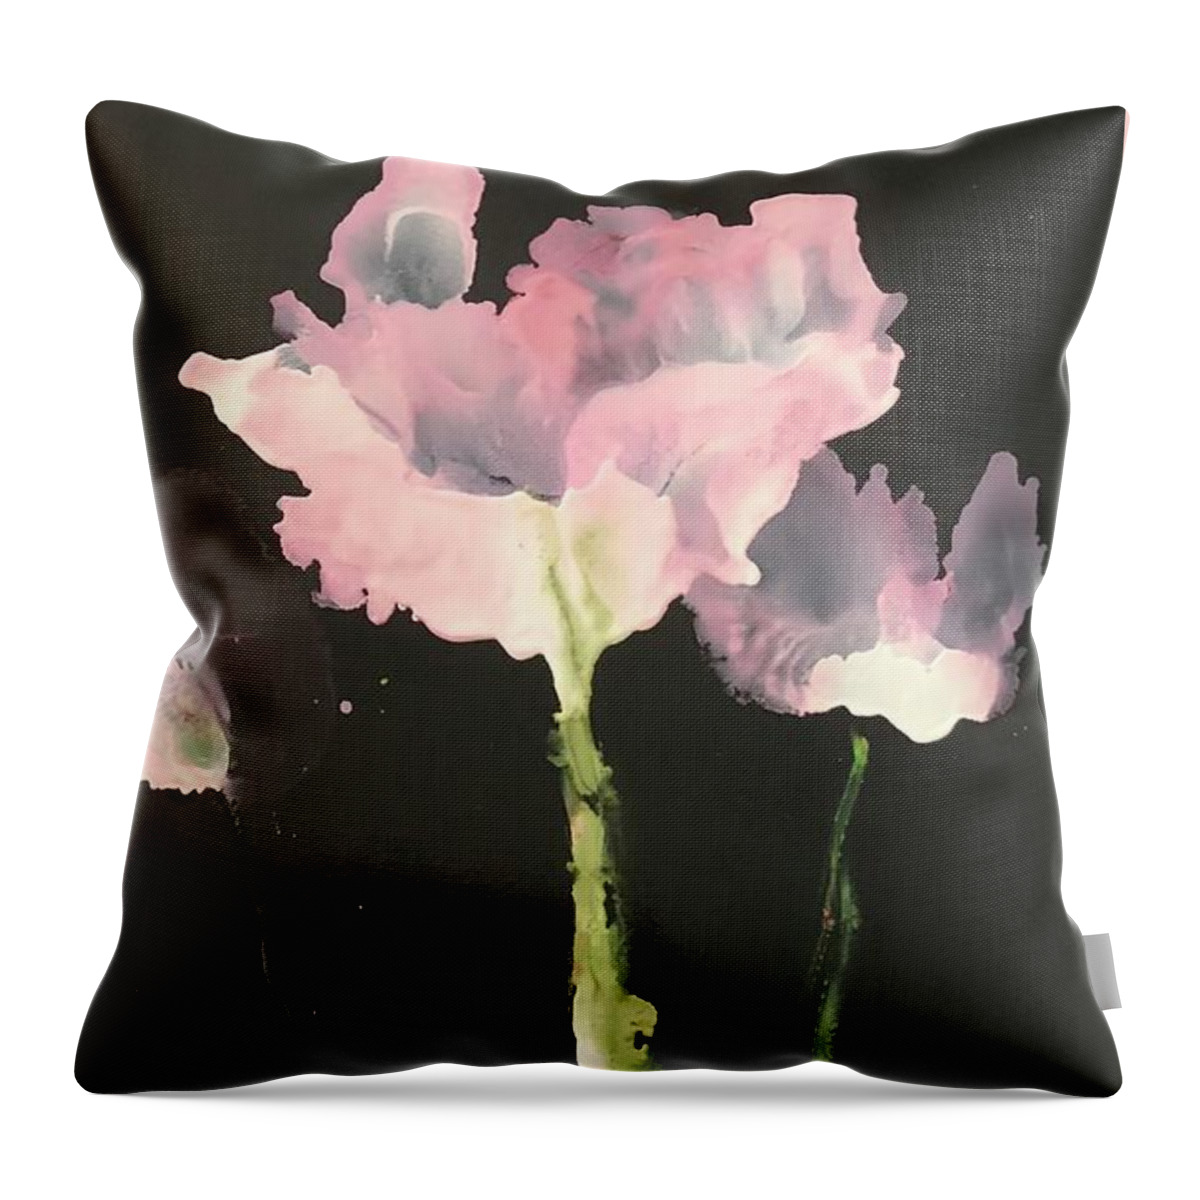 Peach Wild Flowers Throw Pillow featuring the painting For You by Tommy McDonell